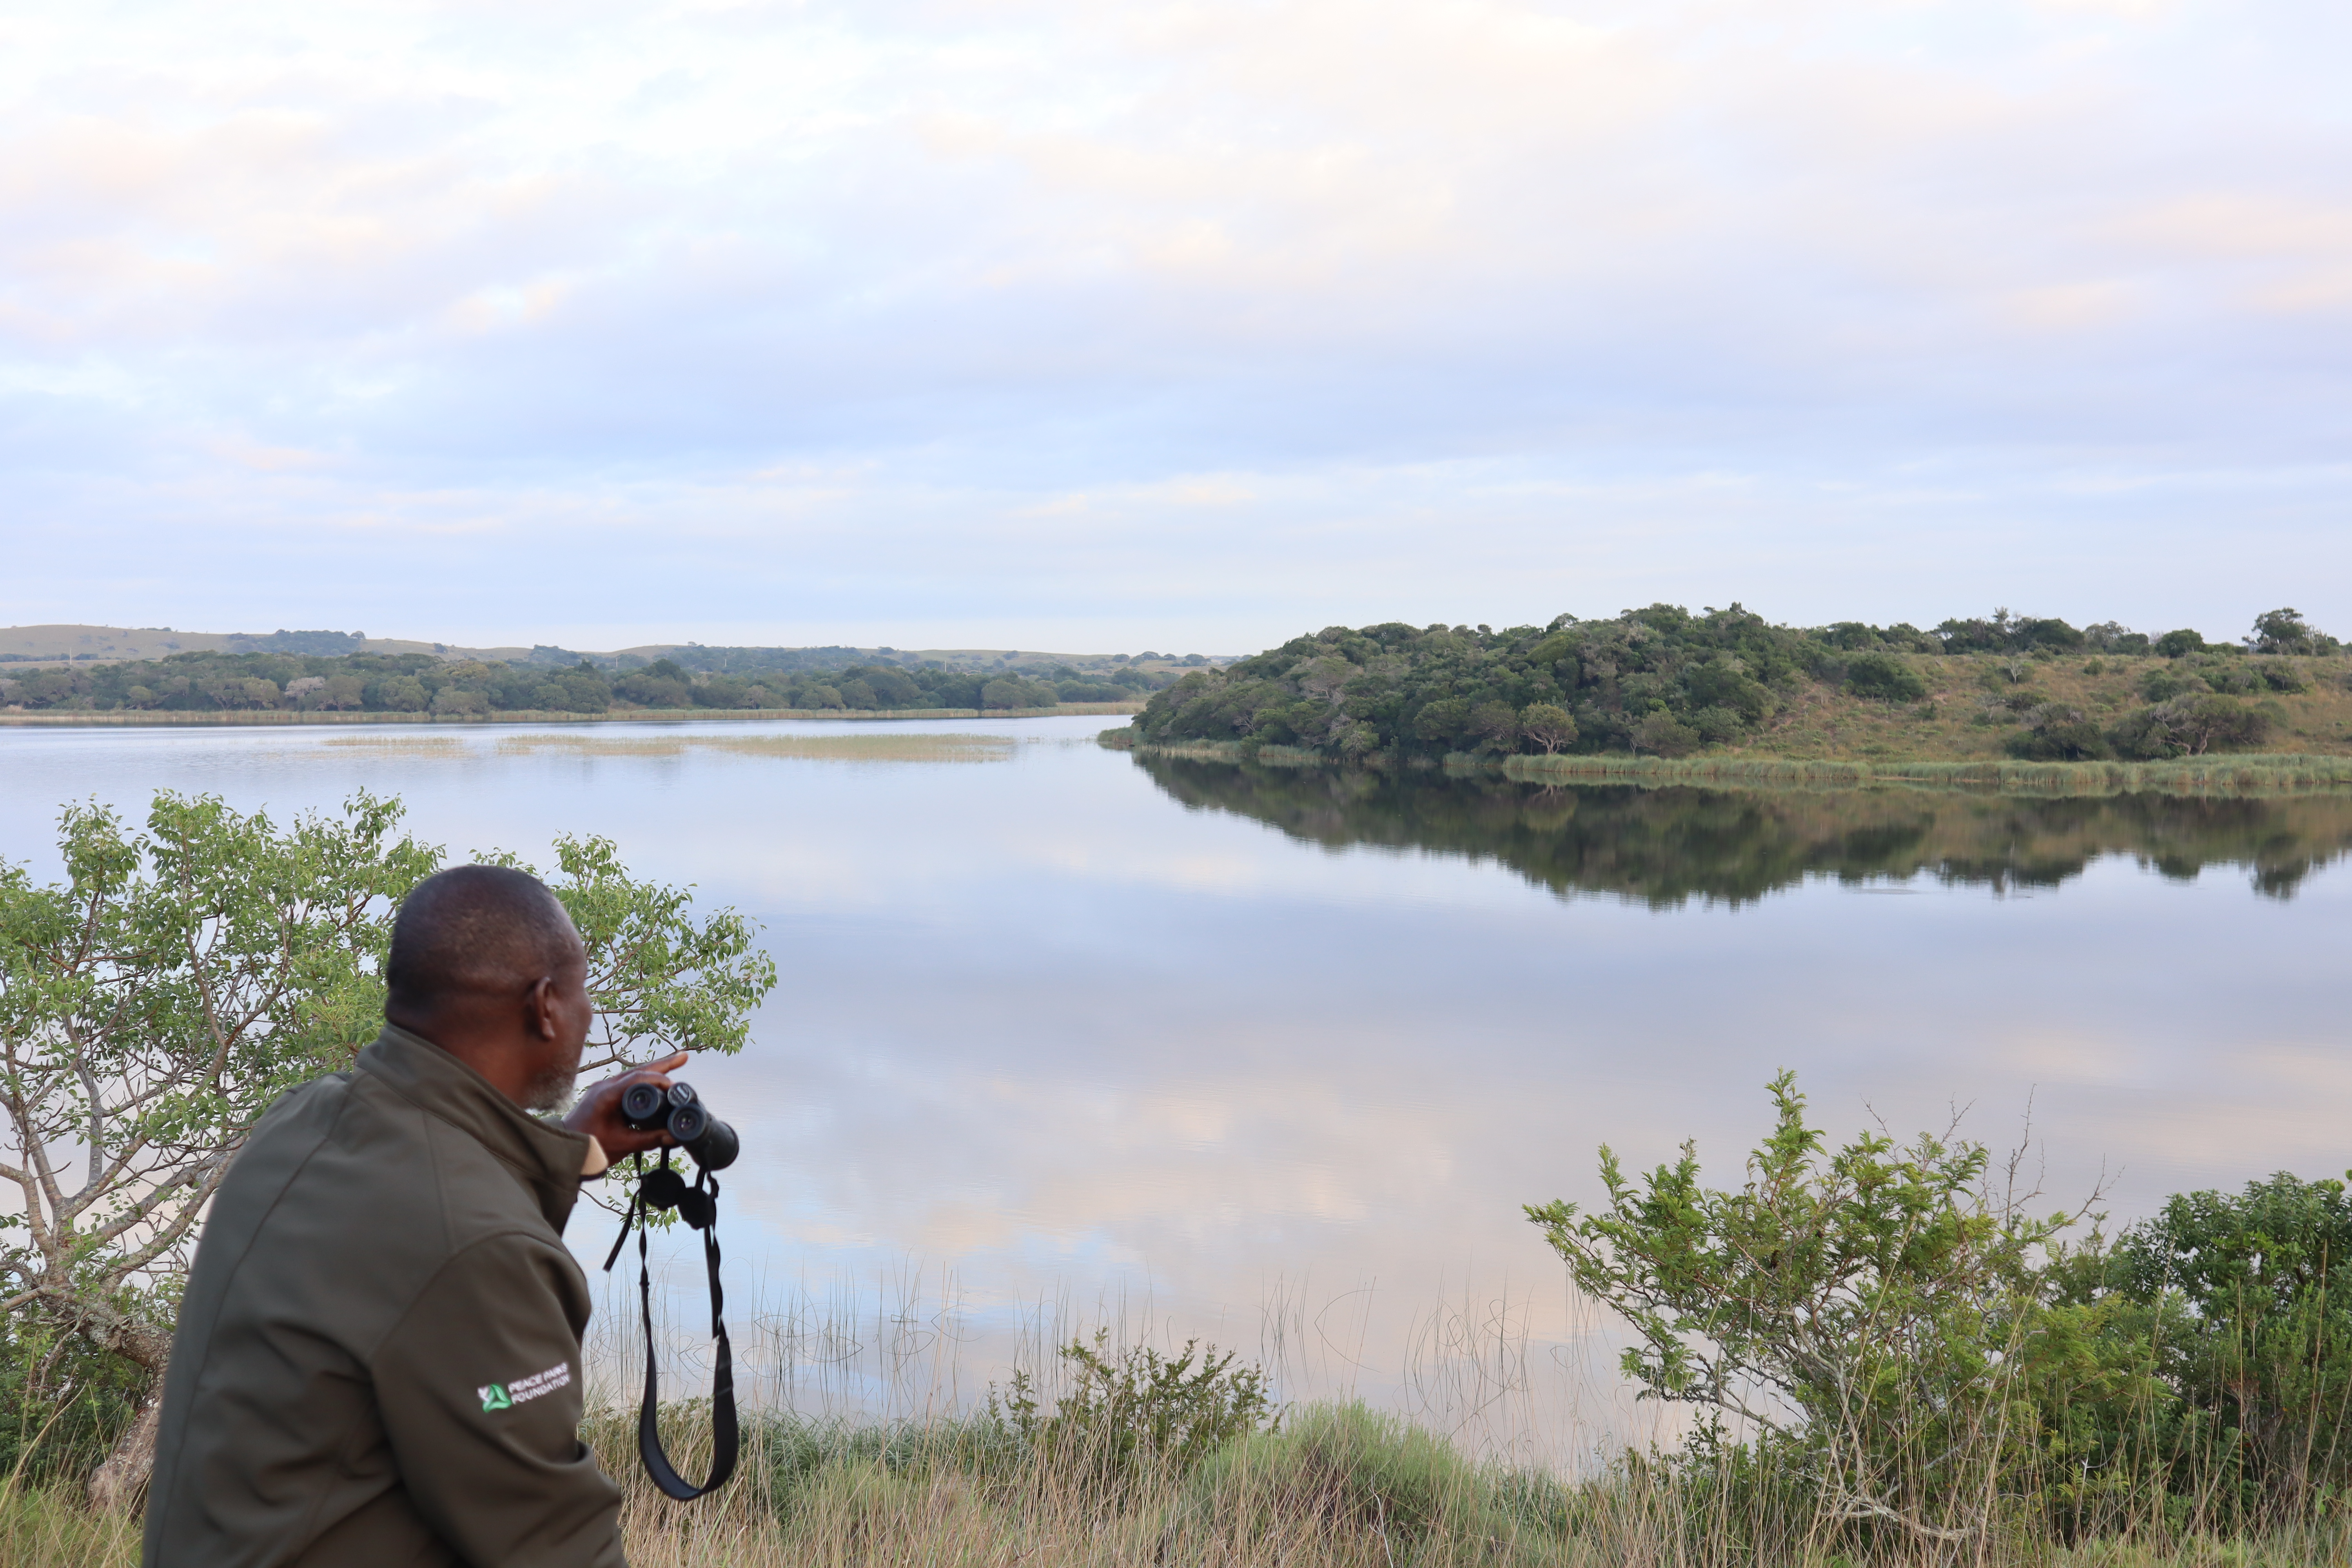 Rodolfo Cumbane searches for animals from the edge of a lake